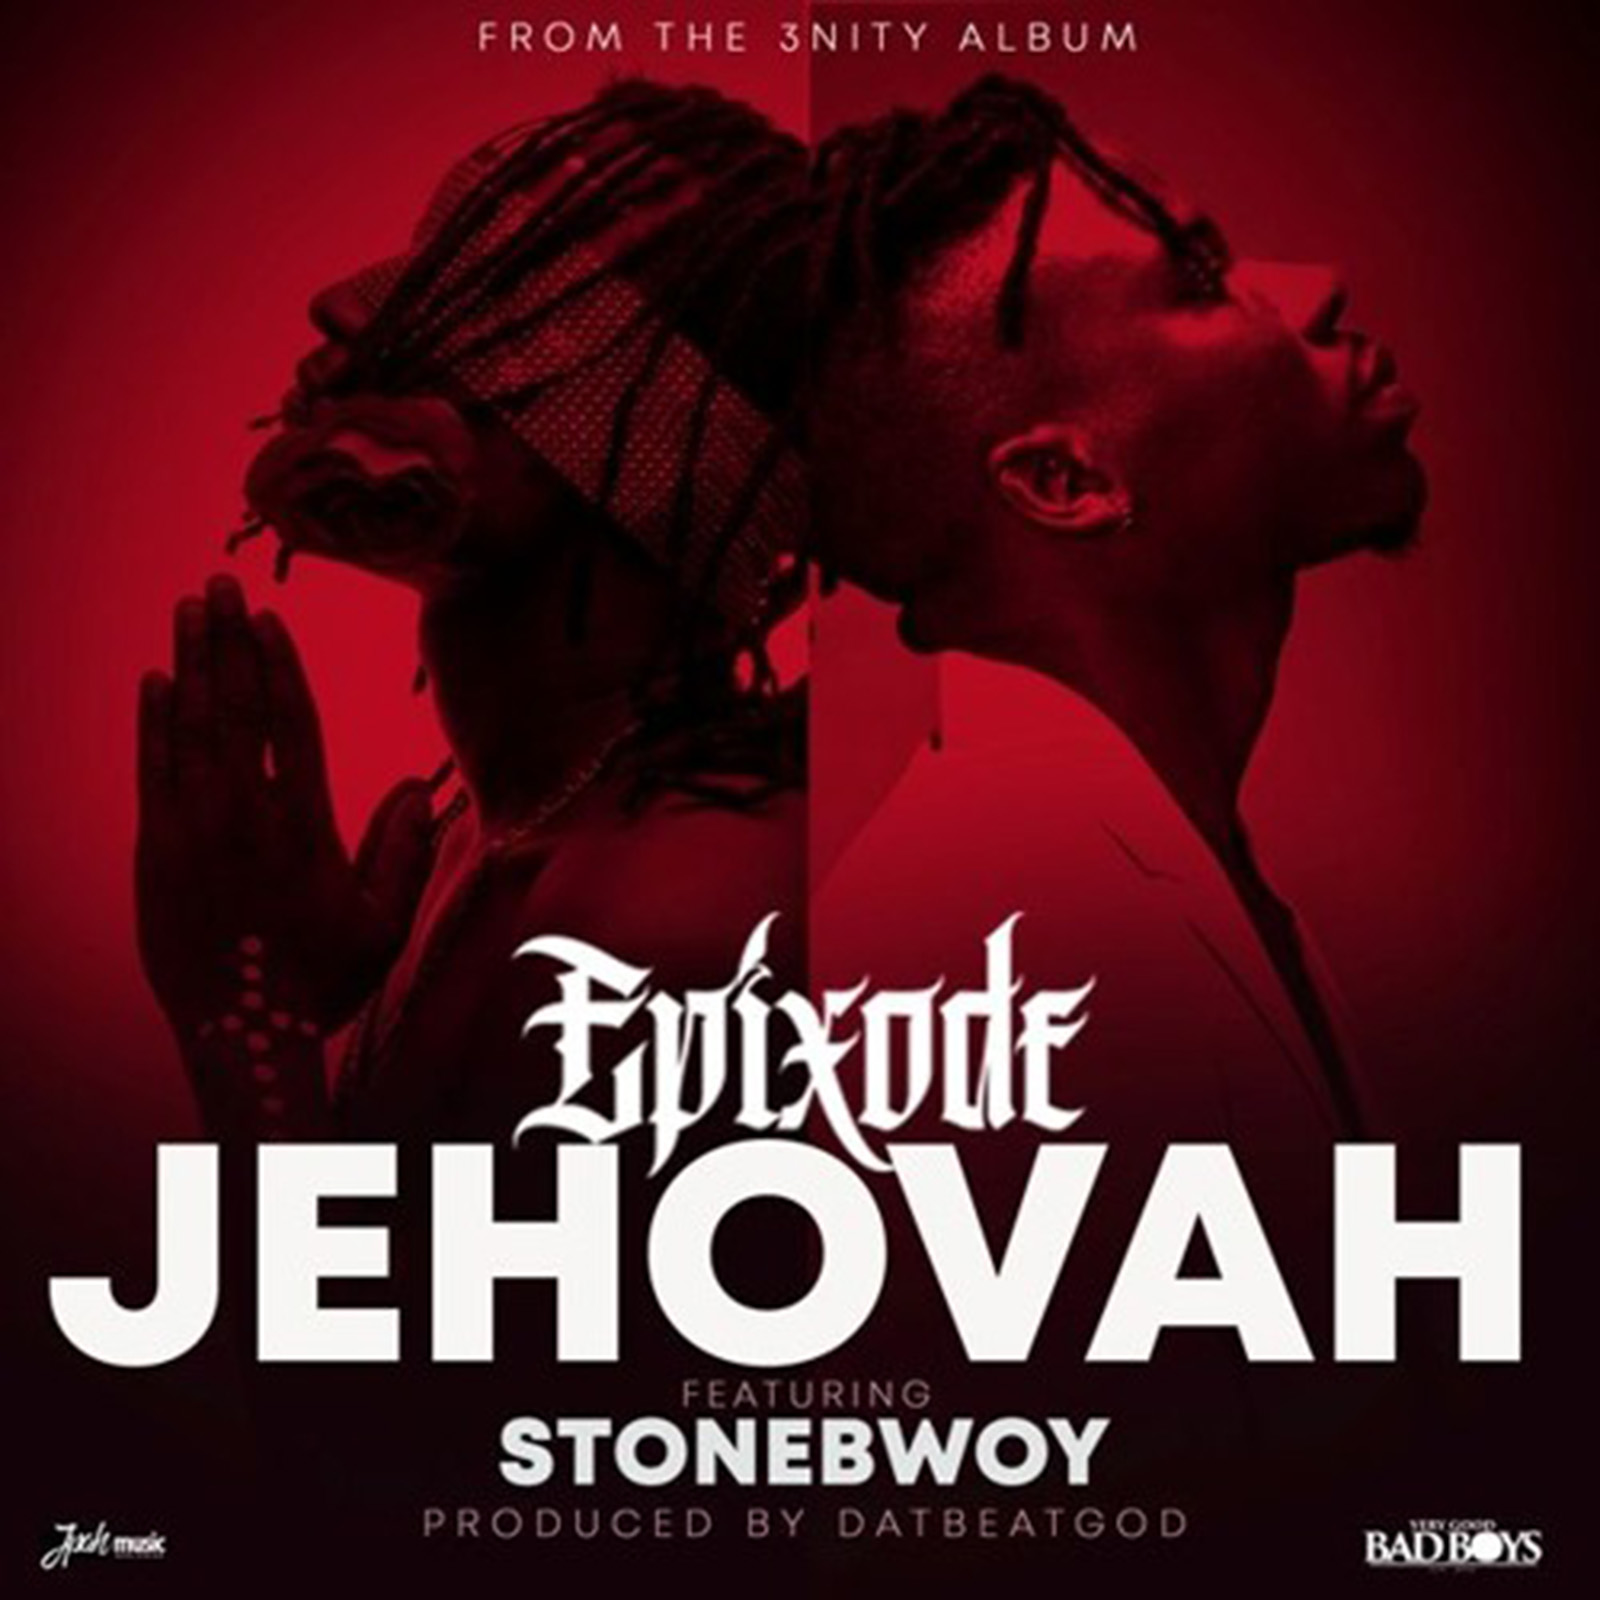 Jehovah by Epixode feat. Stonebwoy